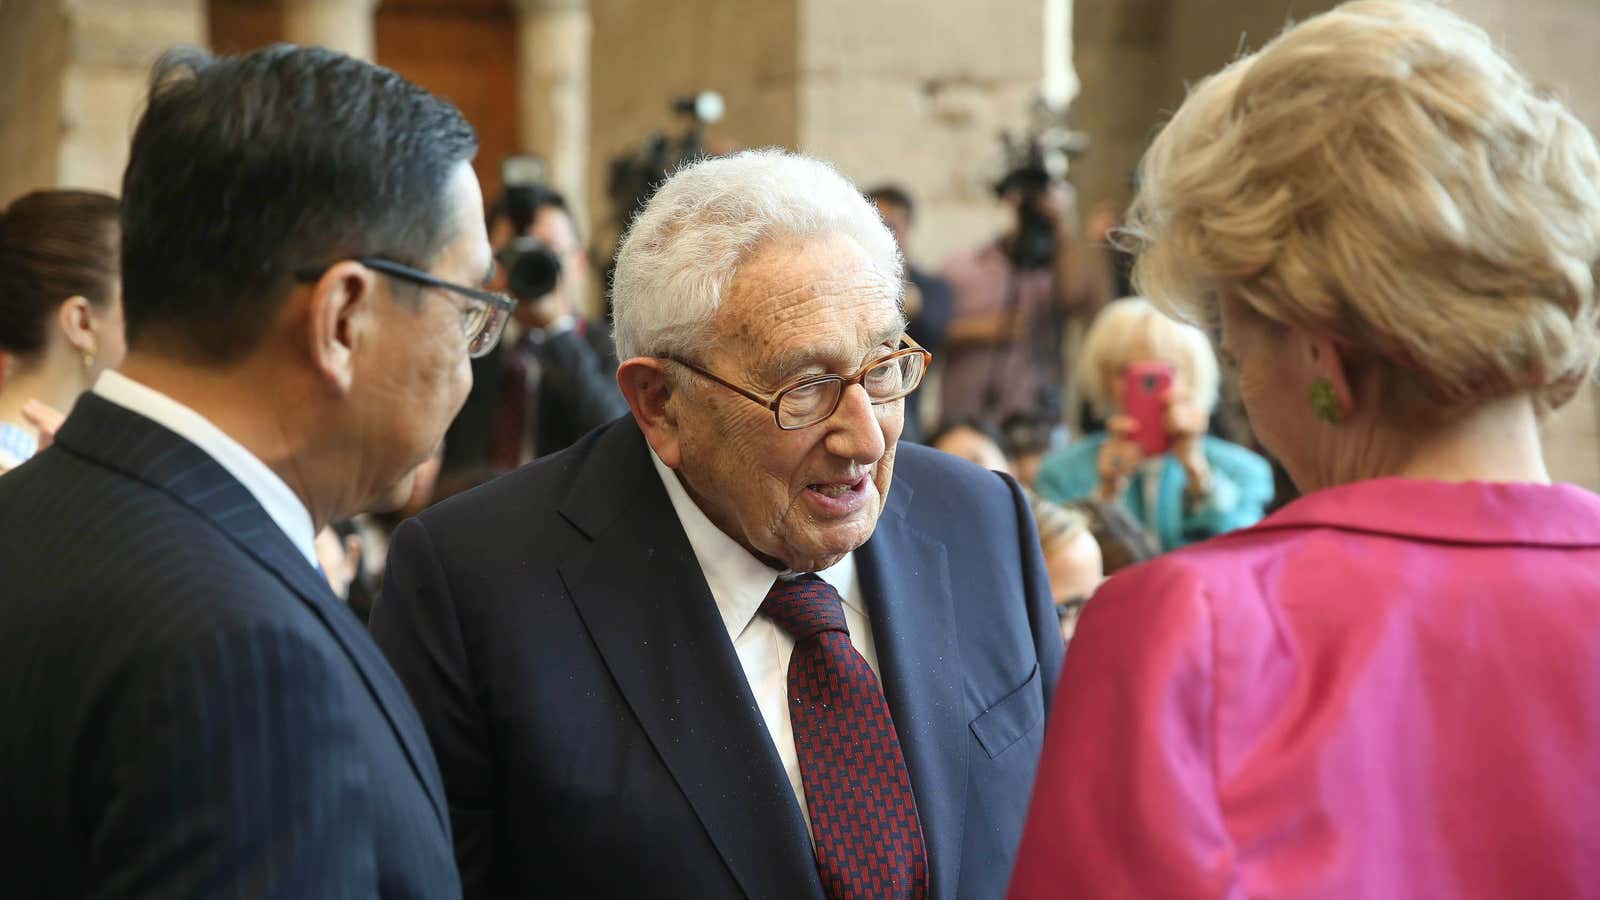 Noted fashion plate Henry Kissinger at the Met on May 4, 2015.